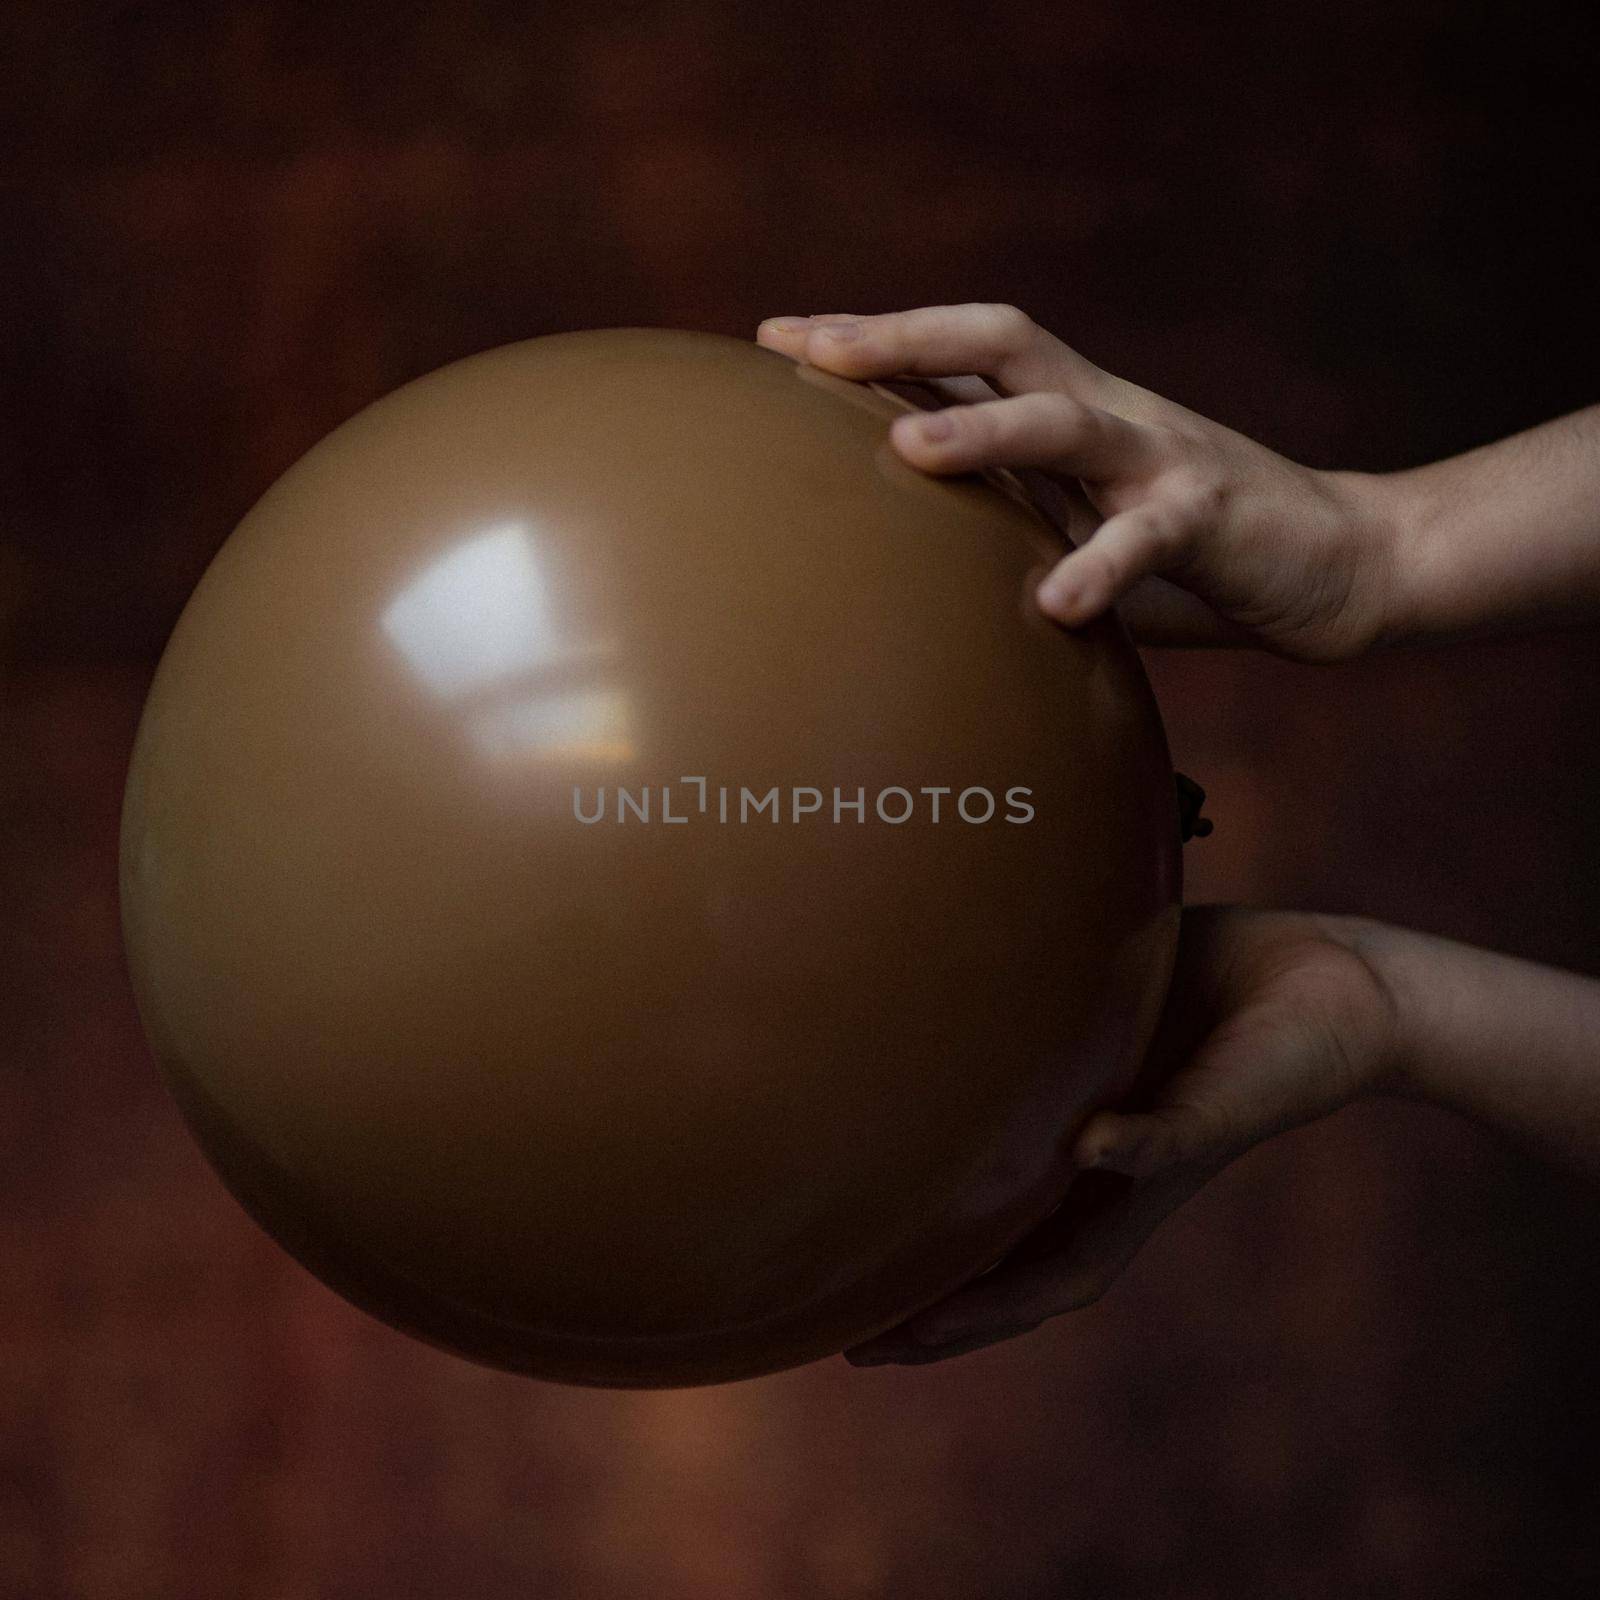 children's toys are diverse fantasies and dreams take the child's imagination into fantastic unreal game worlds in the photo the girl's hands are holding a brown balloon by Costin